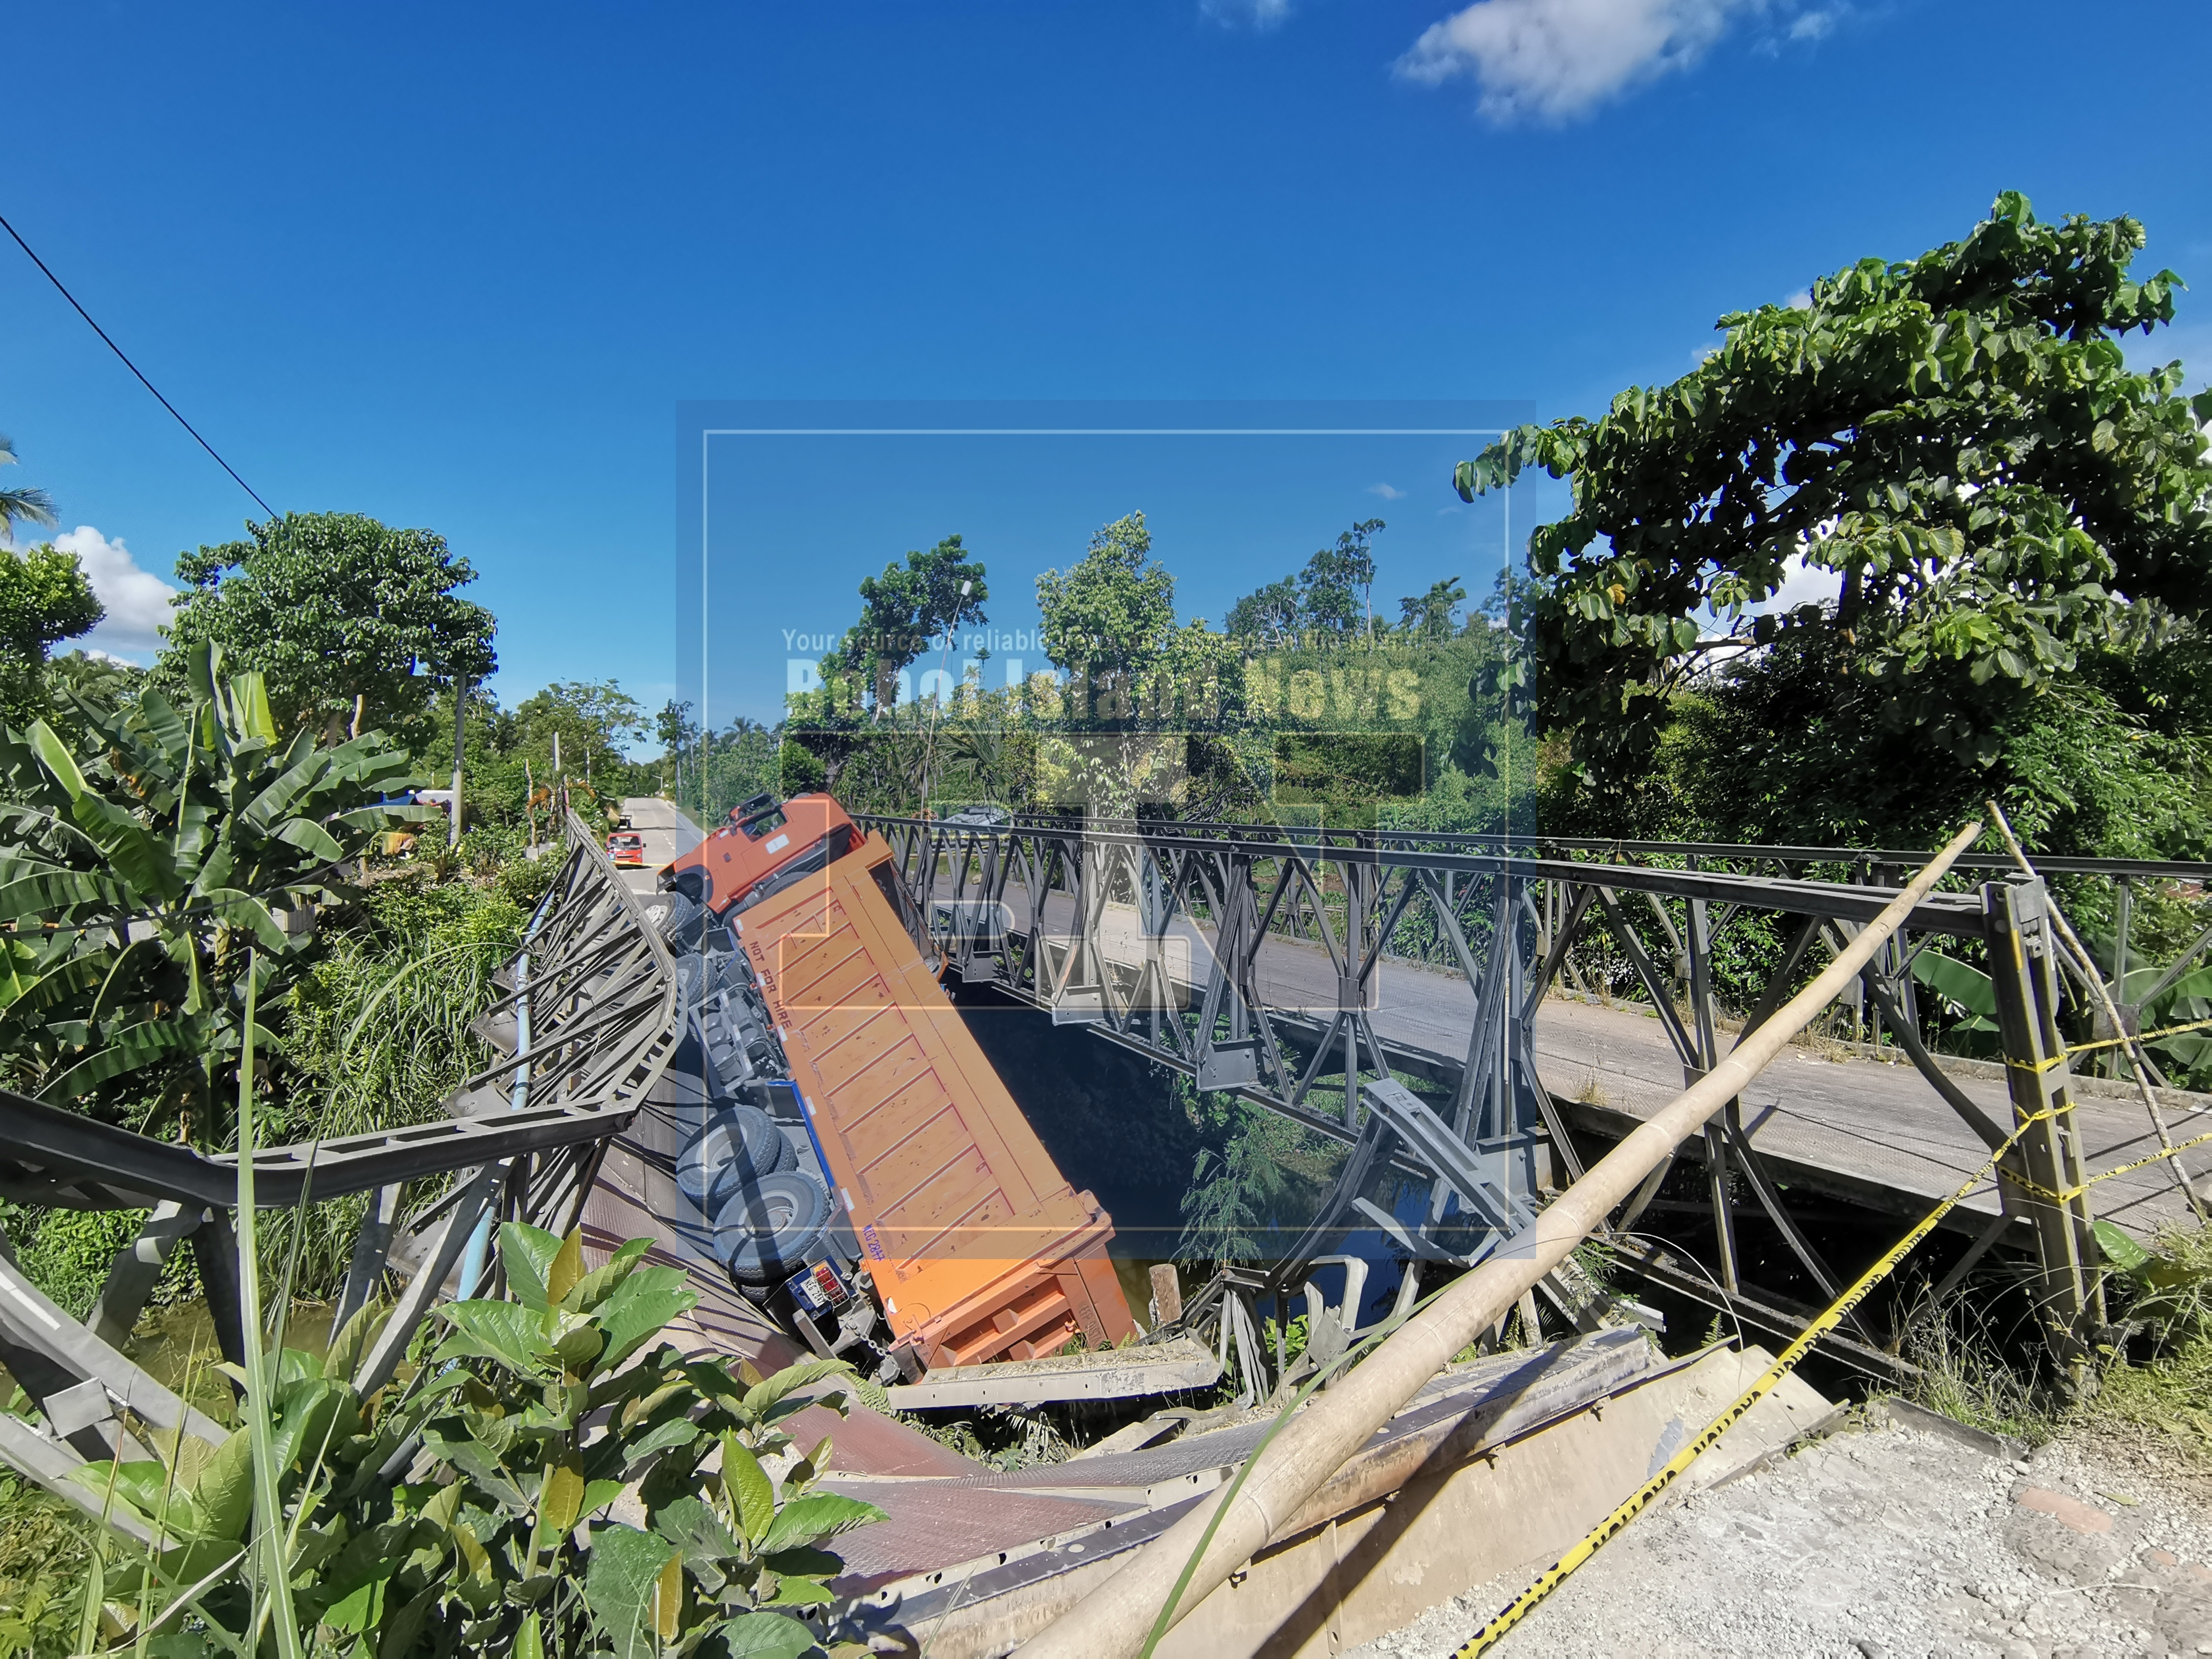 Overloading seen as cause of Catigbian bridge collapse